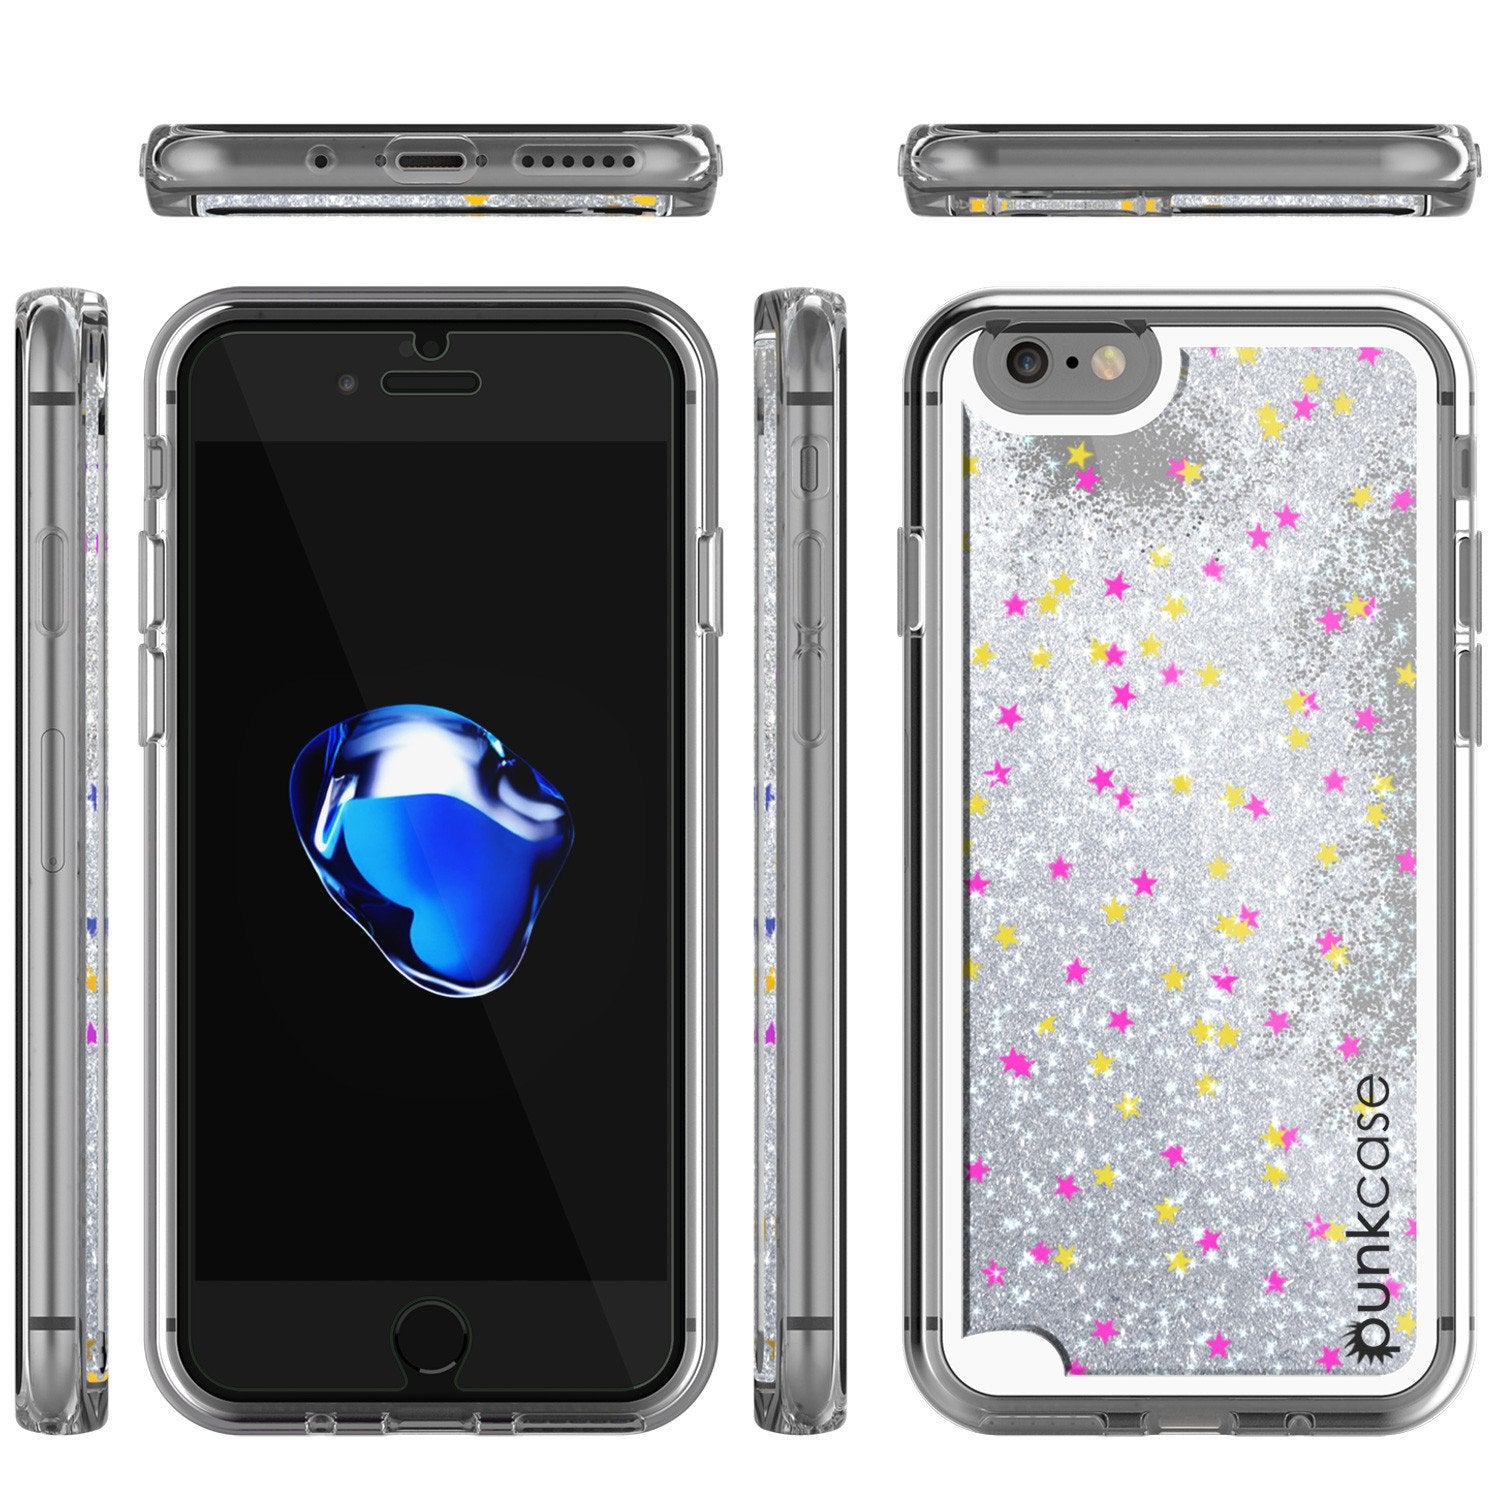 iPhone 7 Case, Punkcase [Liquid Silver Series] Protective Dual Layer Floating Glitter Cover with lots of Bling & Sparkle + 0.3mm Tempered Glass Screen Protector for Apple iPhone 7s